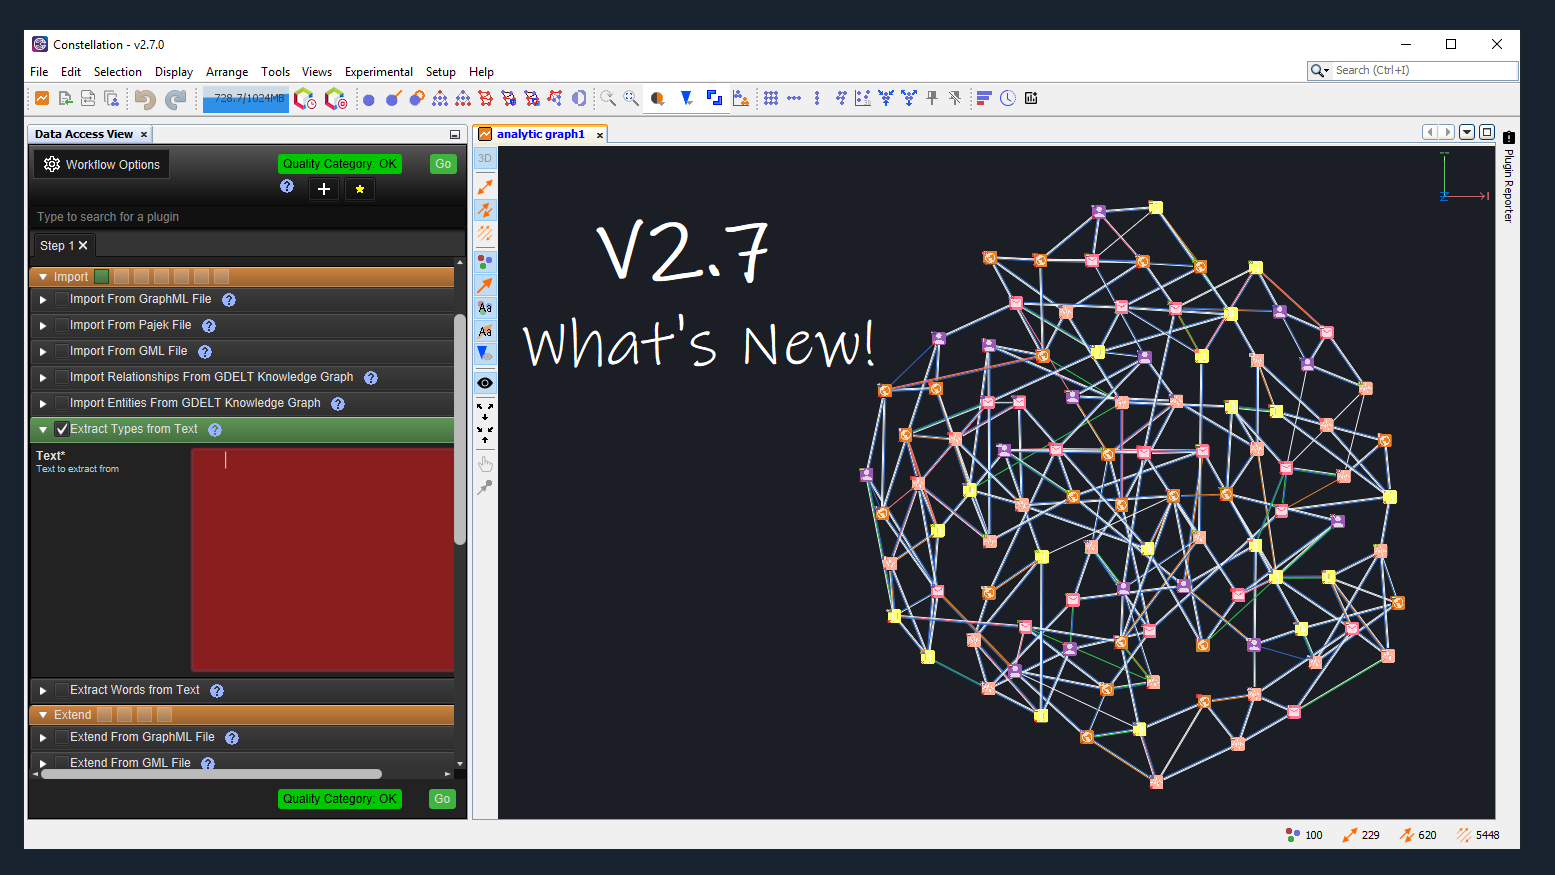 What's new in Constellation v2.7.0